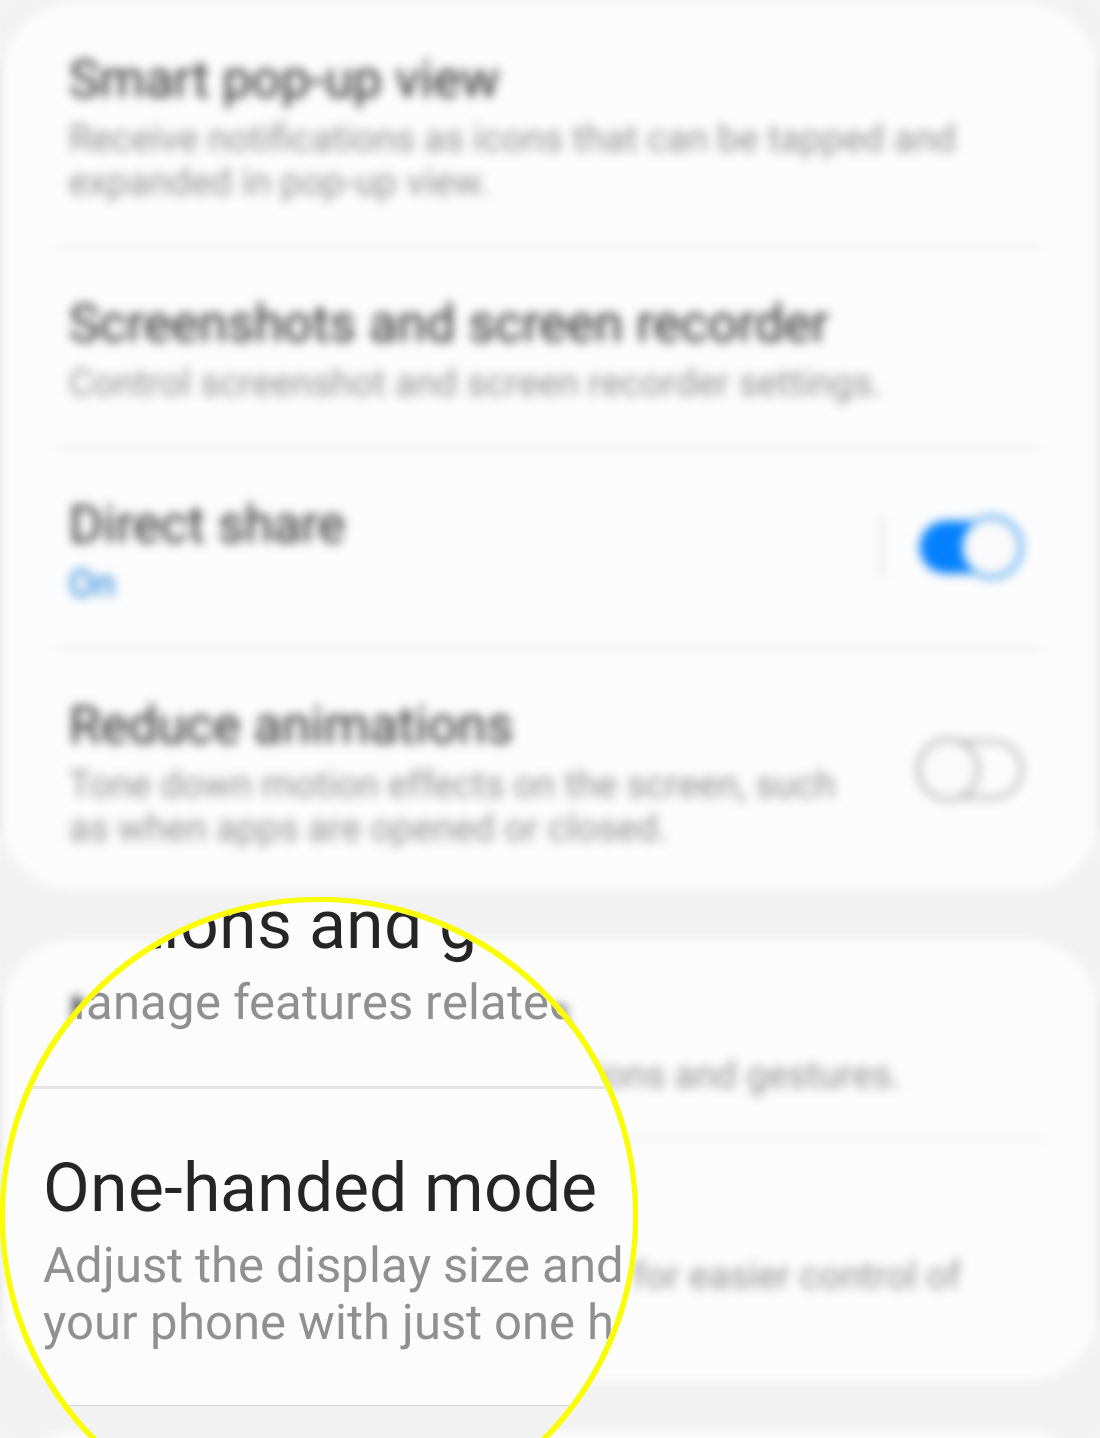 activate galaxy s20 one-handed mode - turn on switch